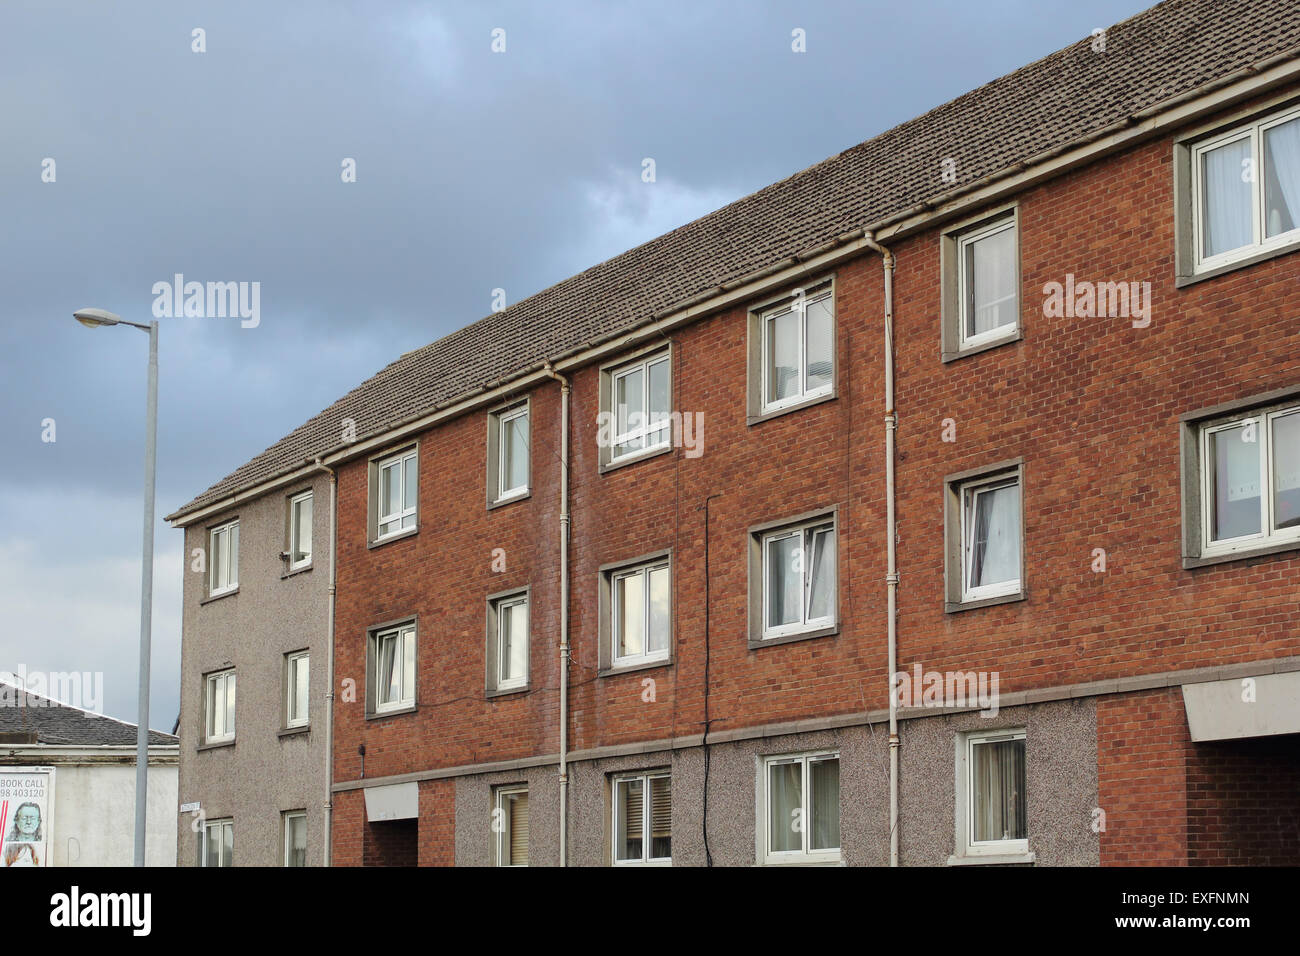 Council flats in Airdrie, North Lanarkshire, Scotland Stock Photo